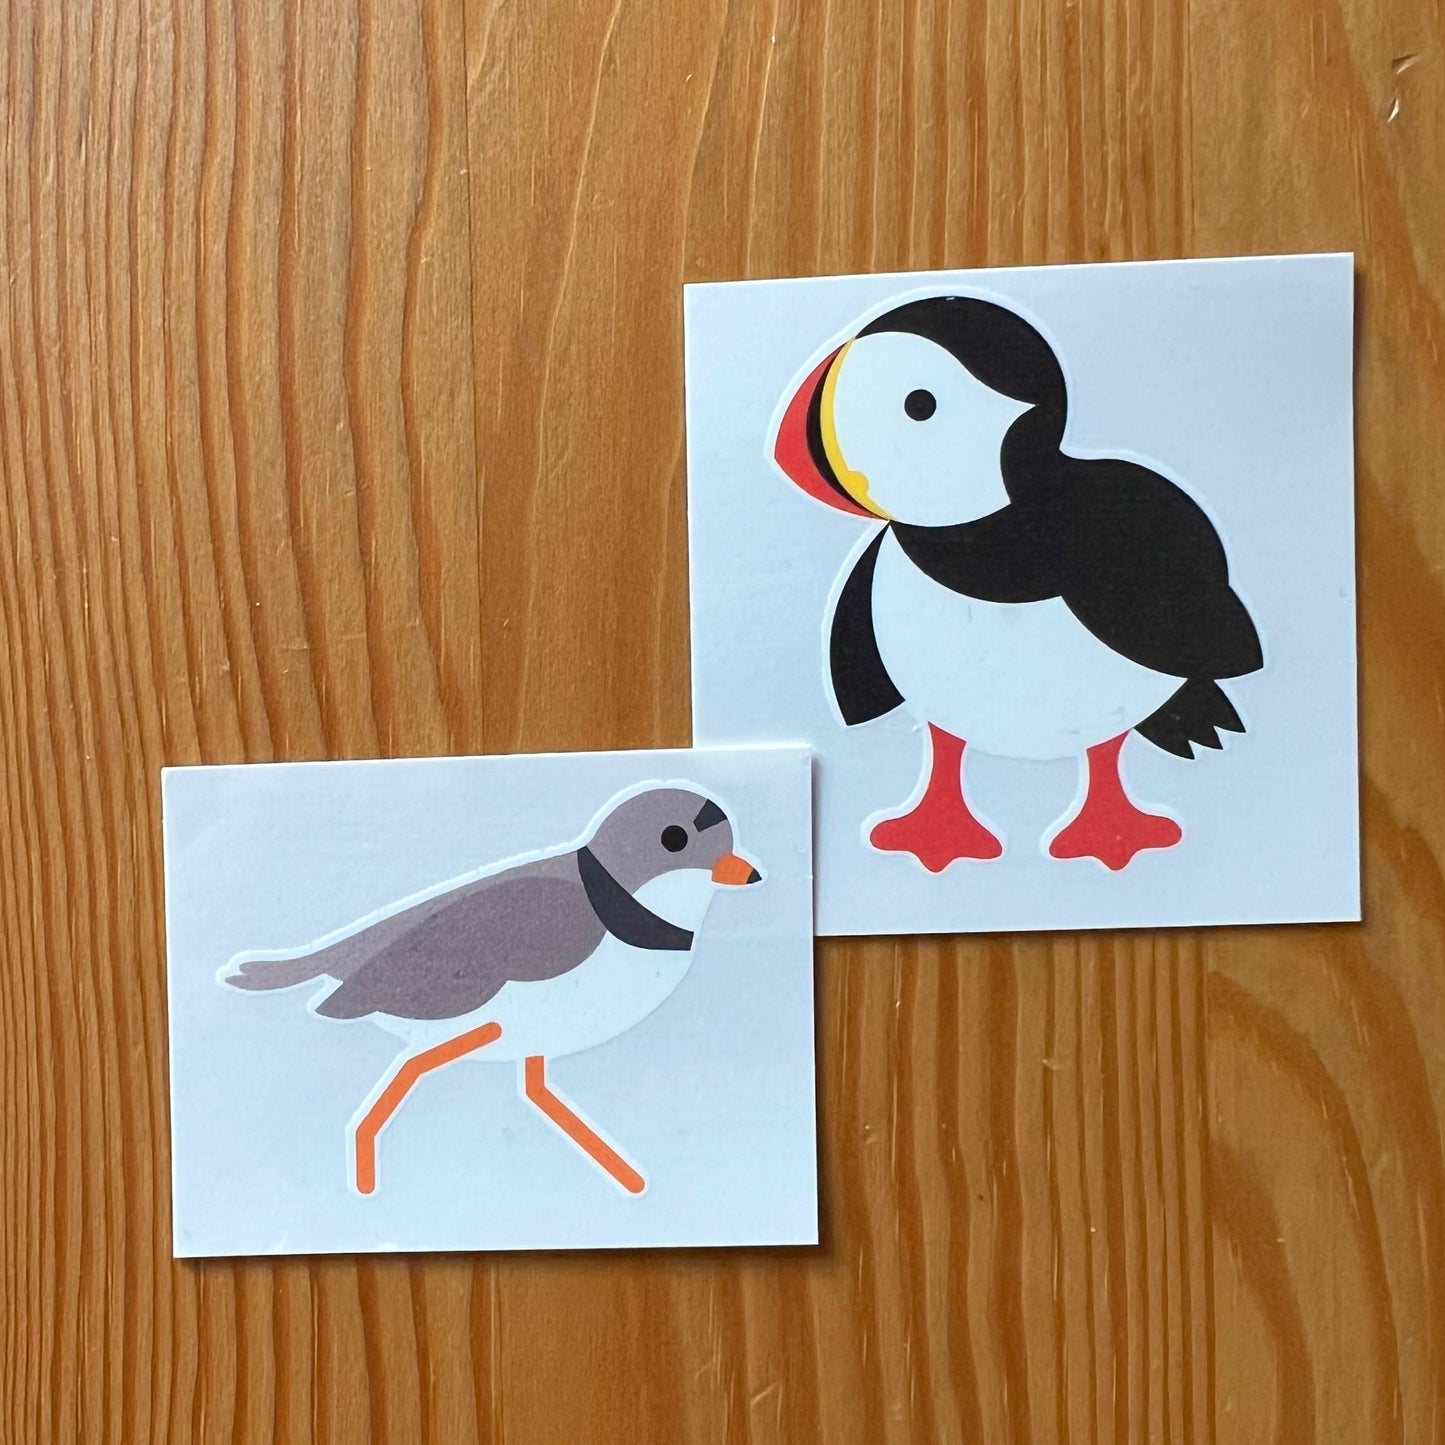 2 Temporary Tattoos: Plover and/or Puffin